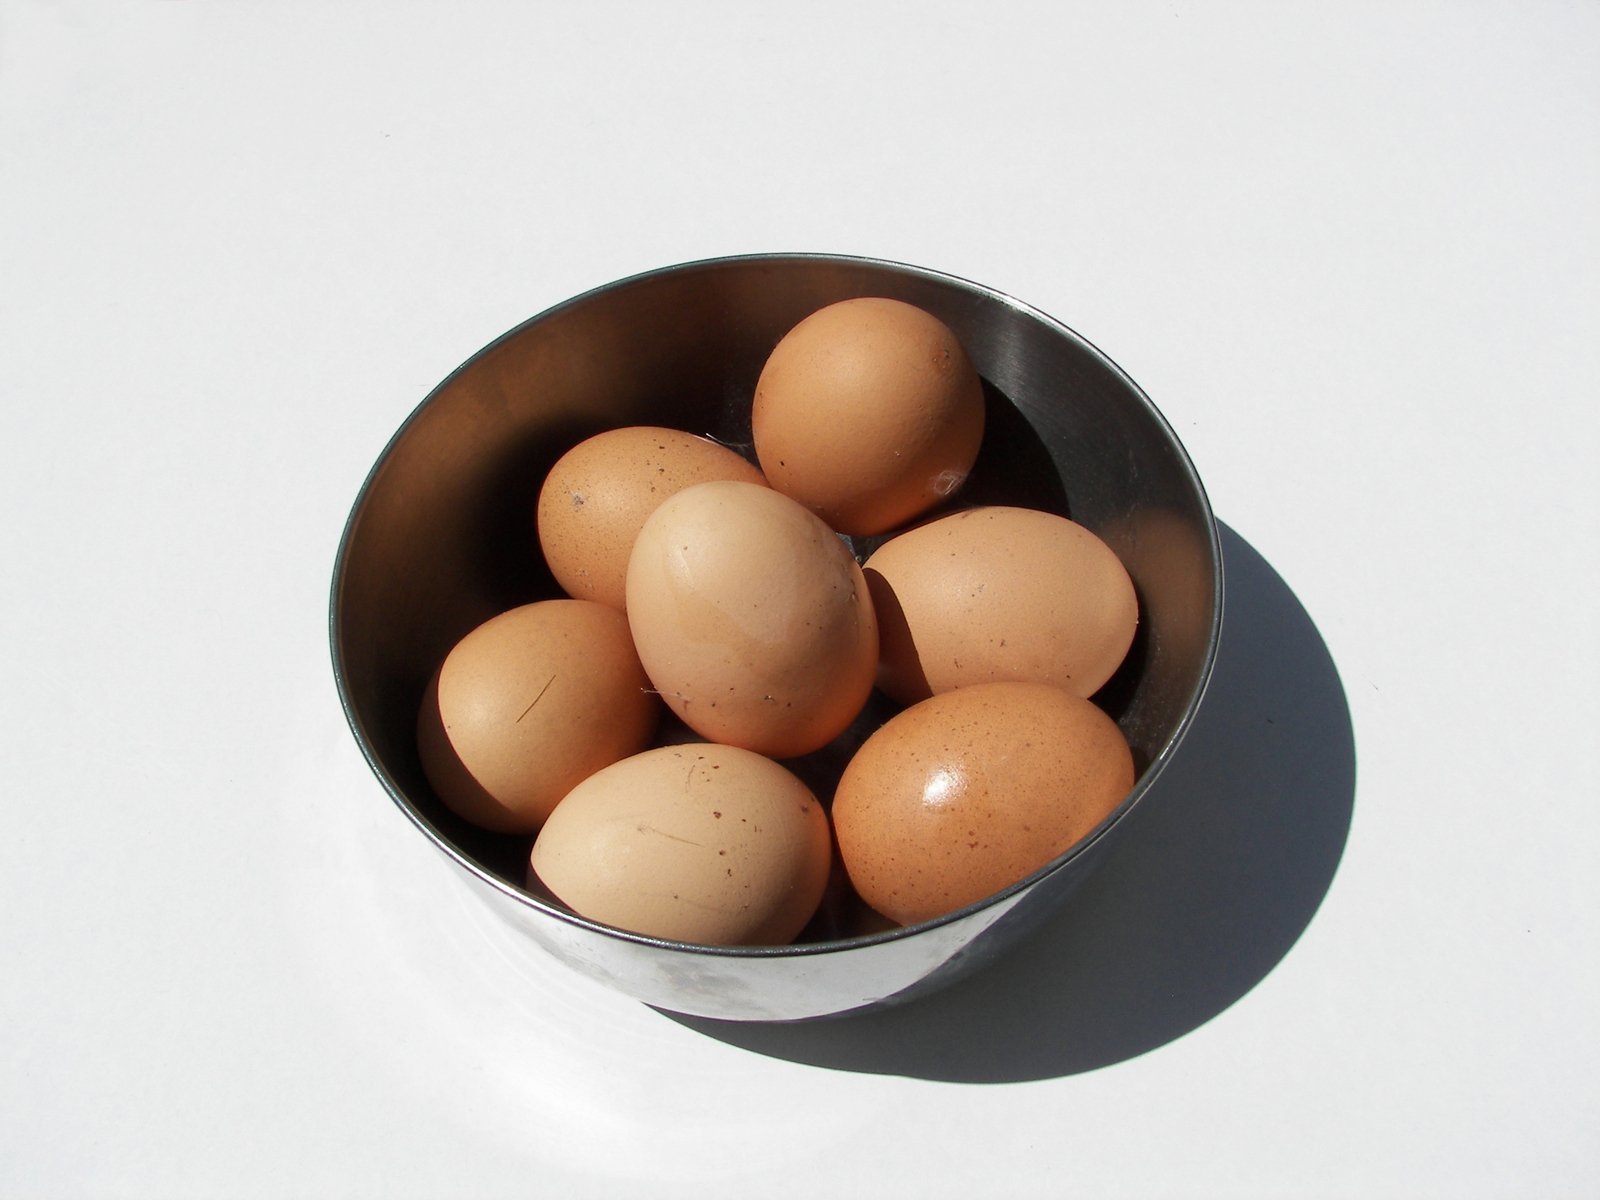 the four eggs are in a bowl on the table